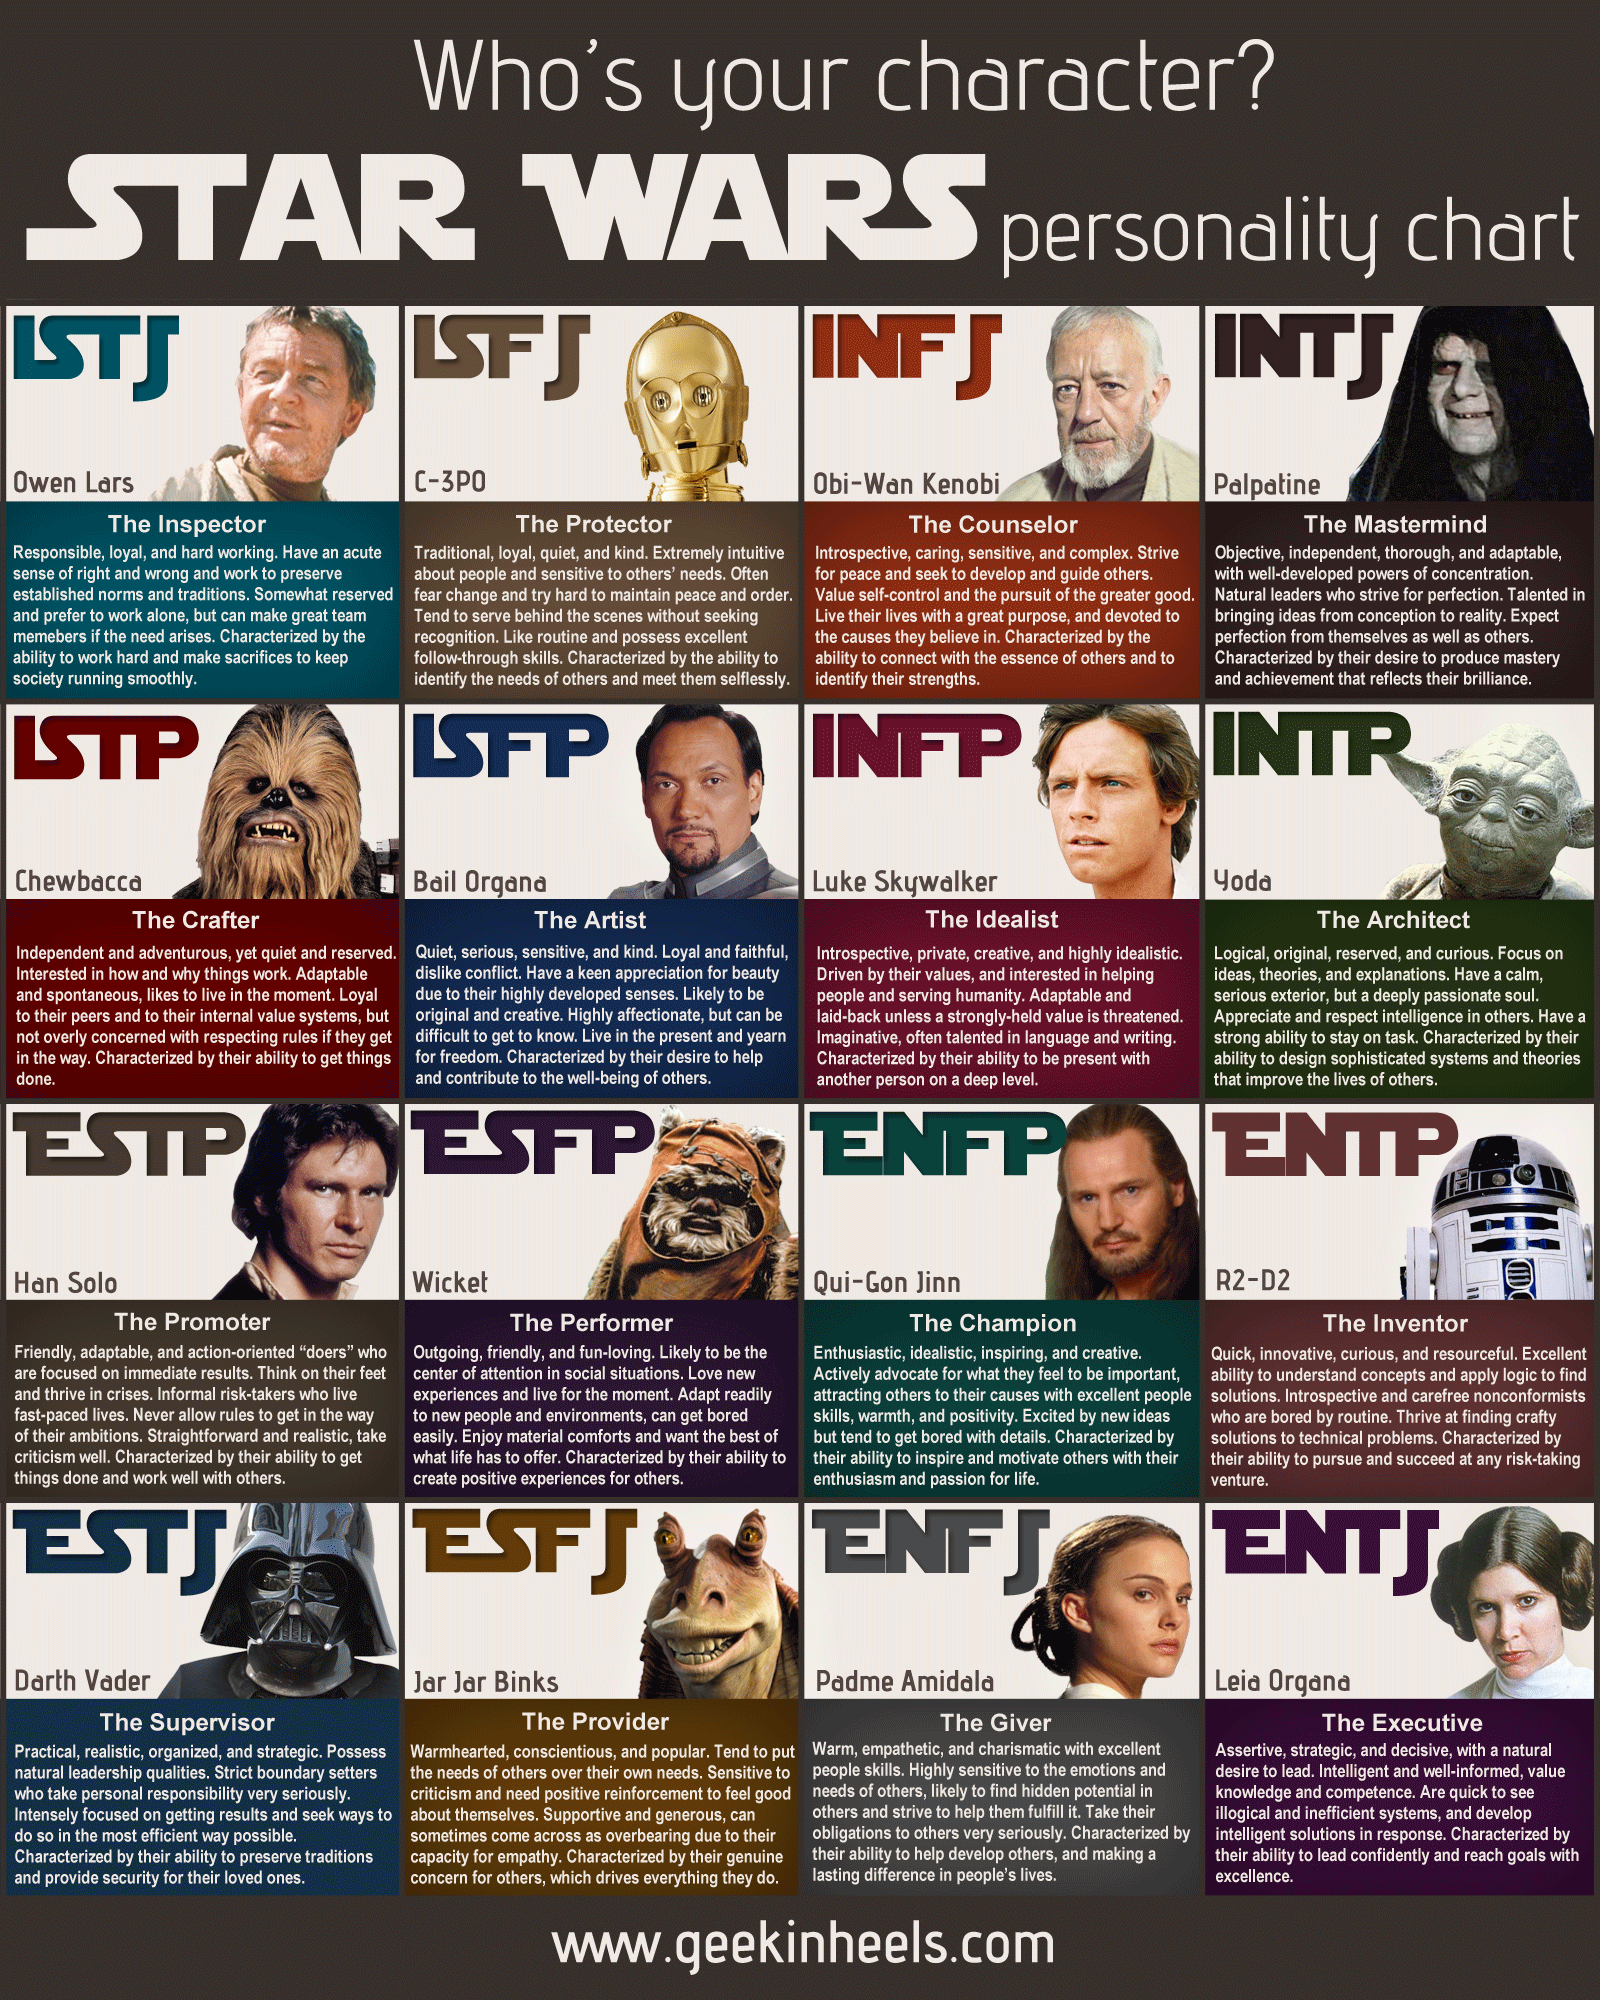 Star Wars - Who's your character?